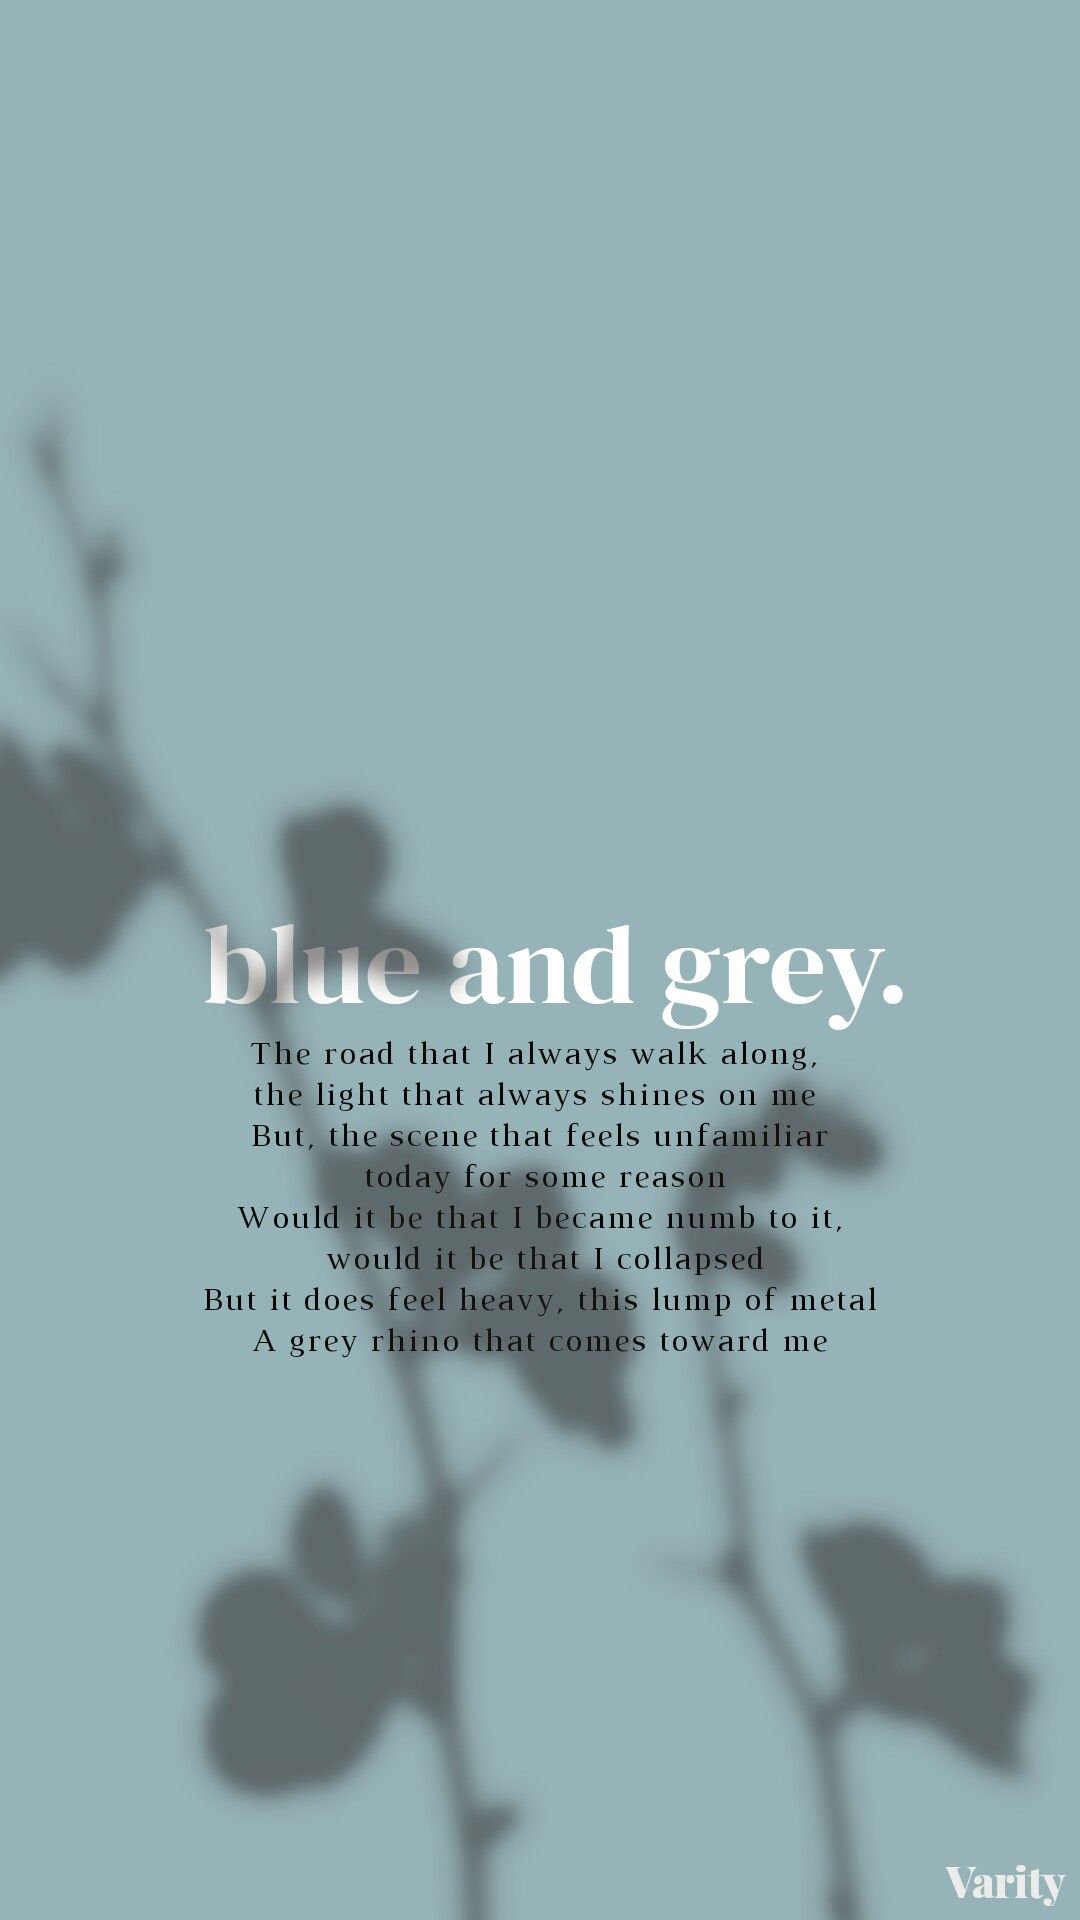 Blue & Grey By BTS Aesthetic Wallpaper Lockscreens In 2021. Bts Wallpaper Lyrics, Bts Lyrics Quotes, Bts Quotes